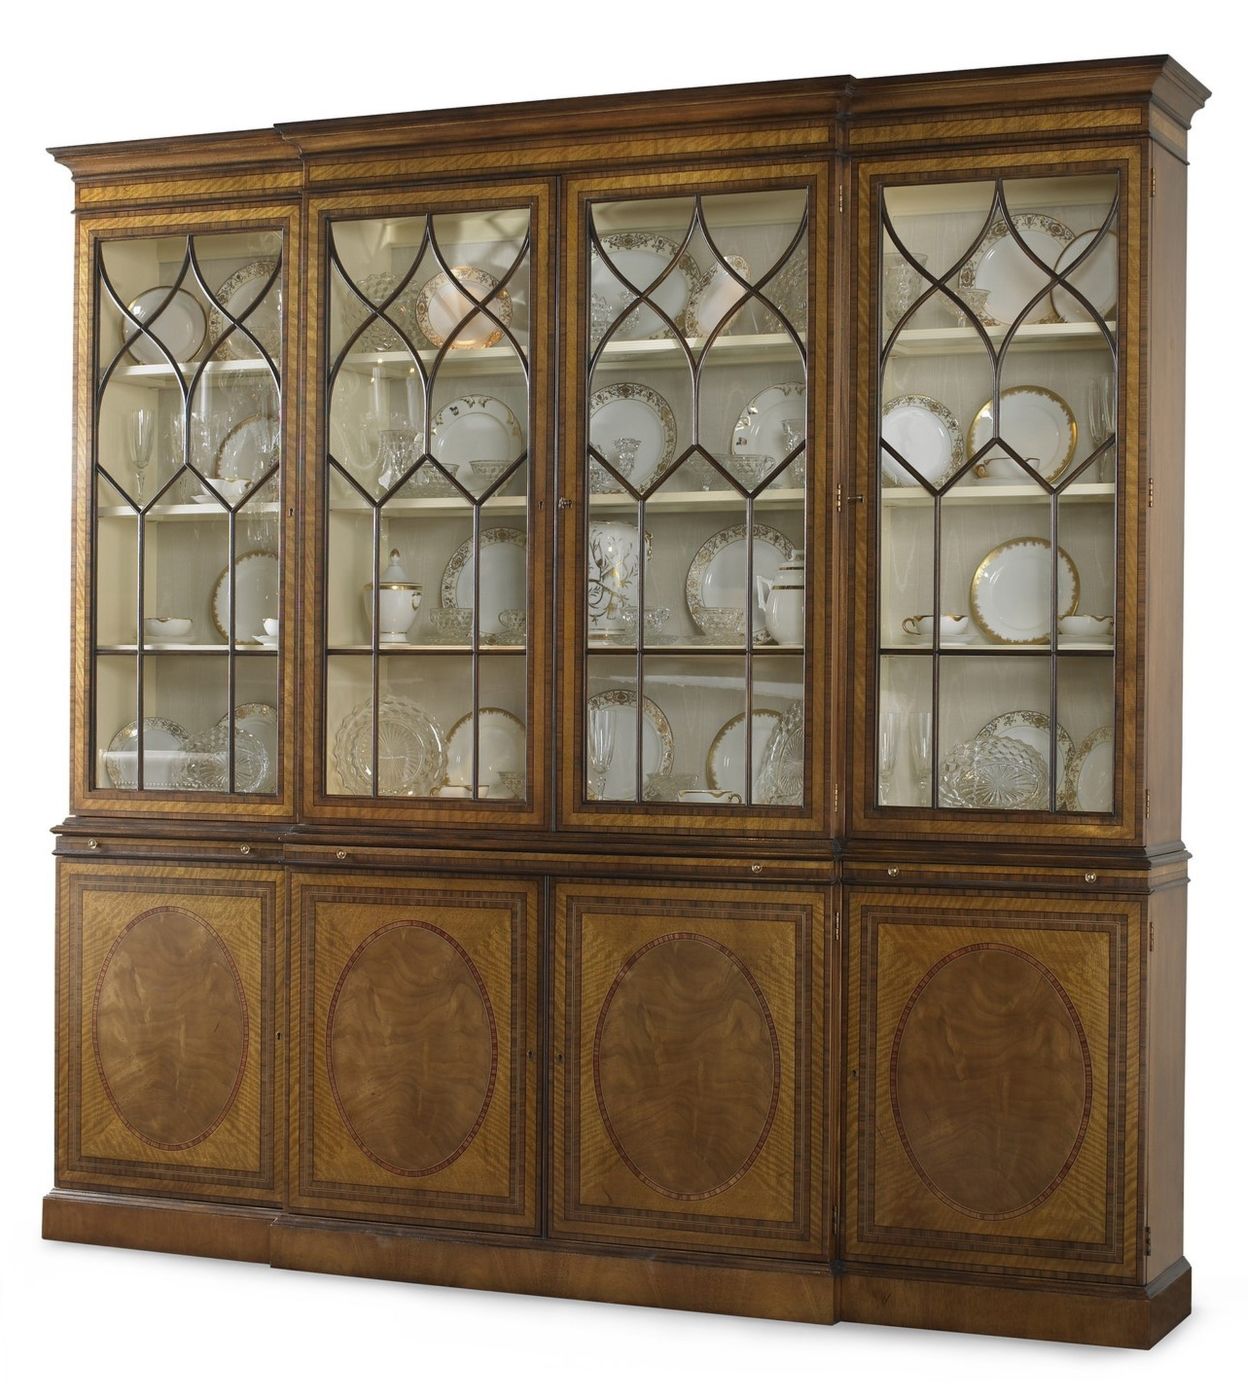 BREAKFRONT CHINA CABINET